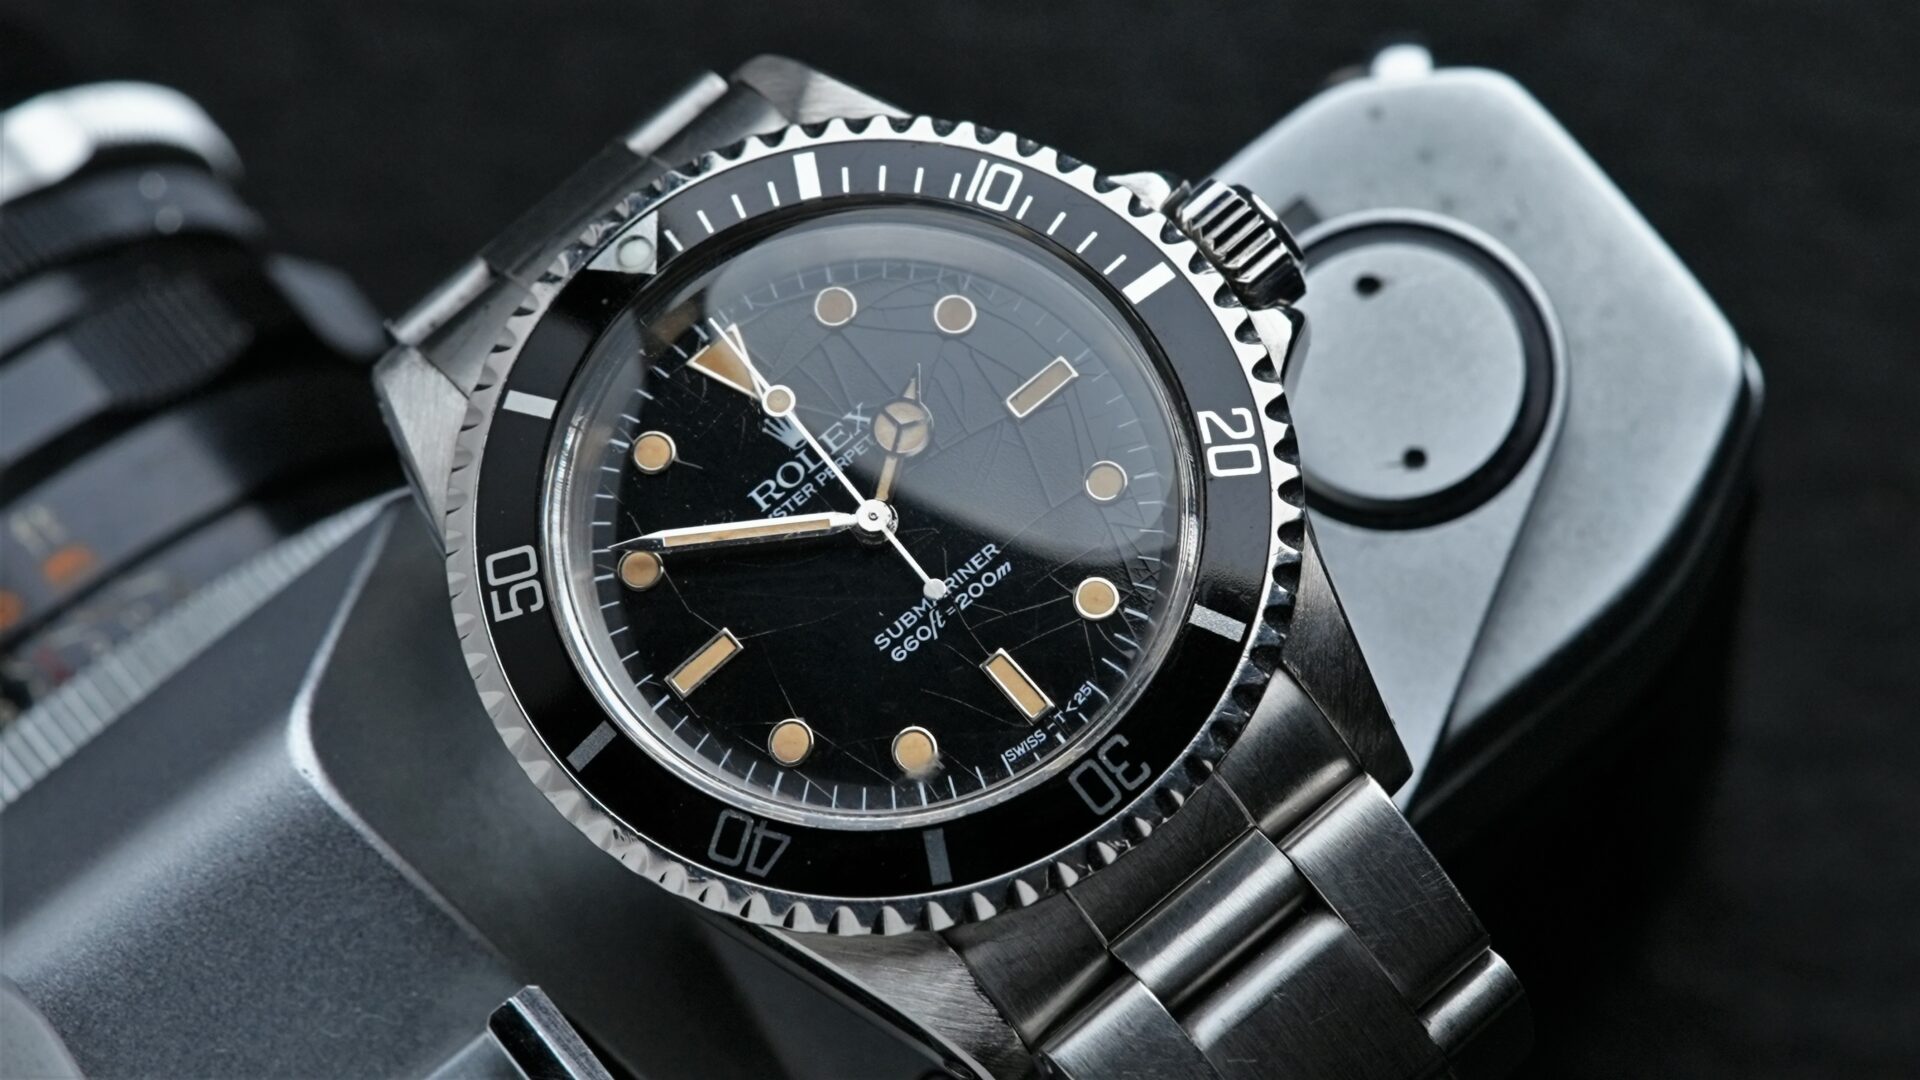 Rolex Submariner 5513 1979 Mark 3. Spider dial shown under white lighting which brings out the spider dial brilliantly.